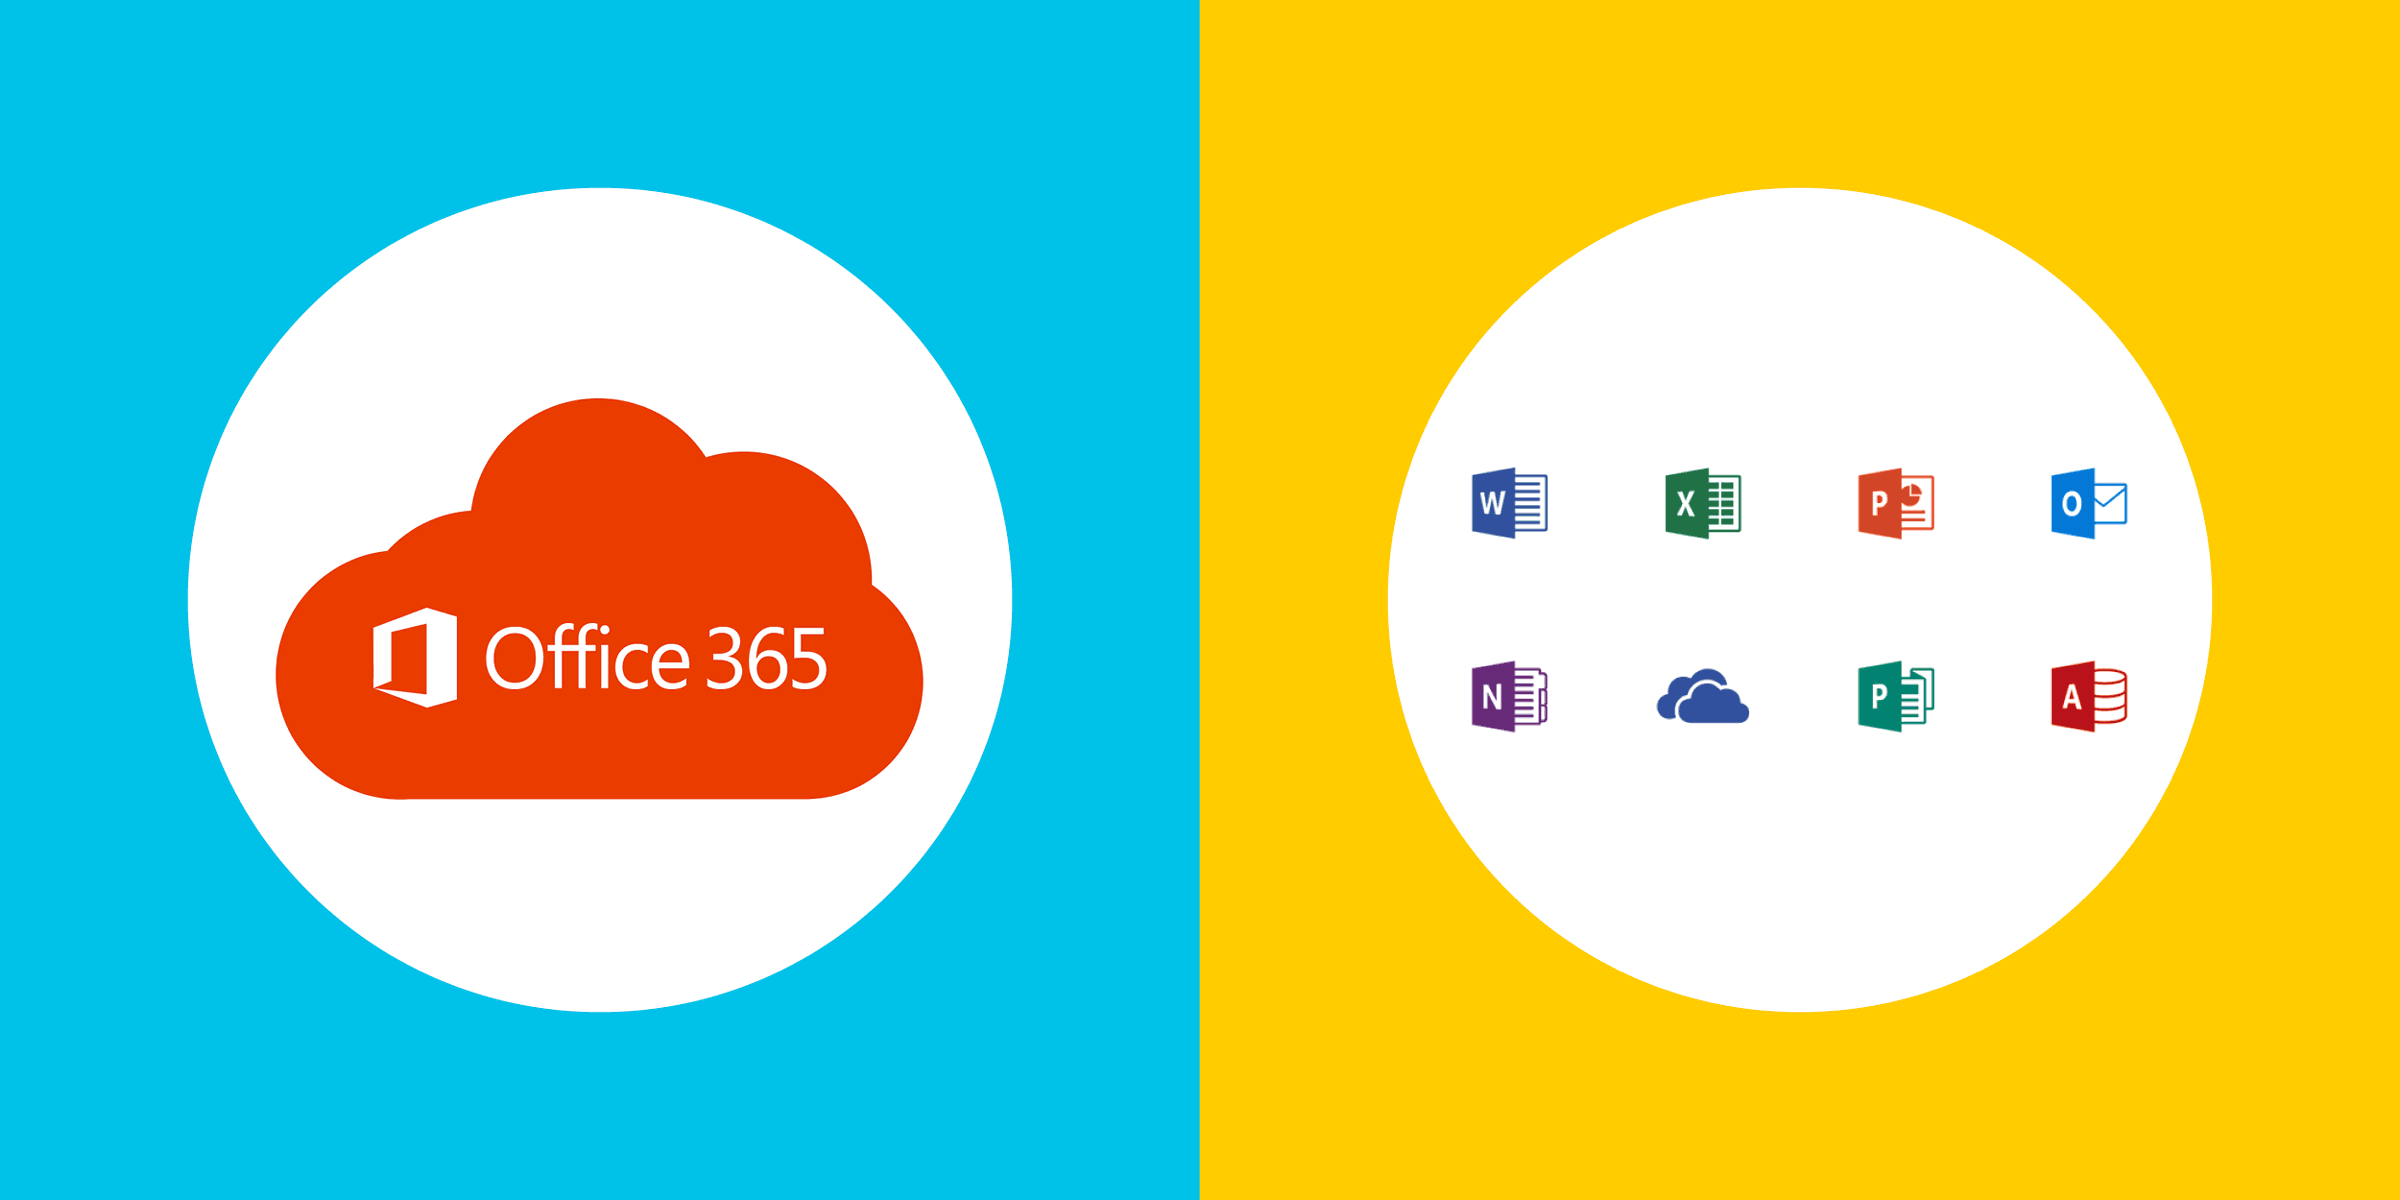 illustration with Microsoft Office 365, Word, Excel, Project, Outlook, OneNote, Cloud, Publisher, and Access logos